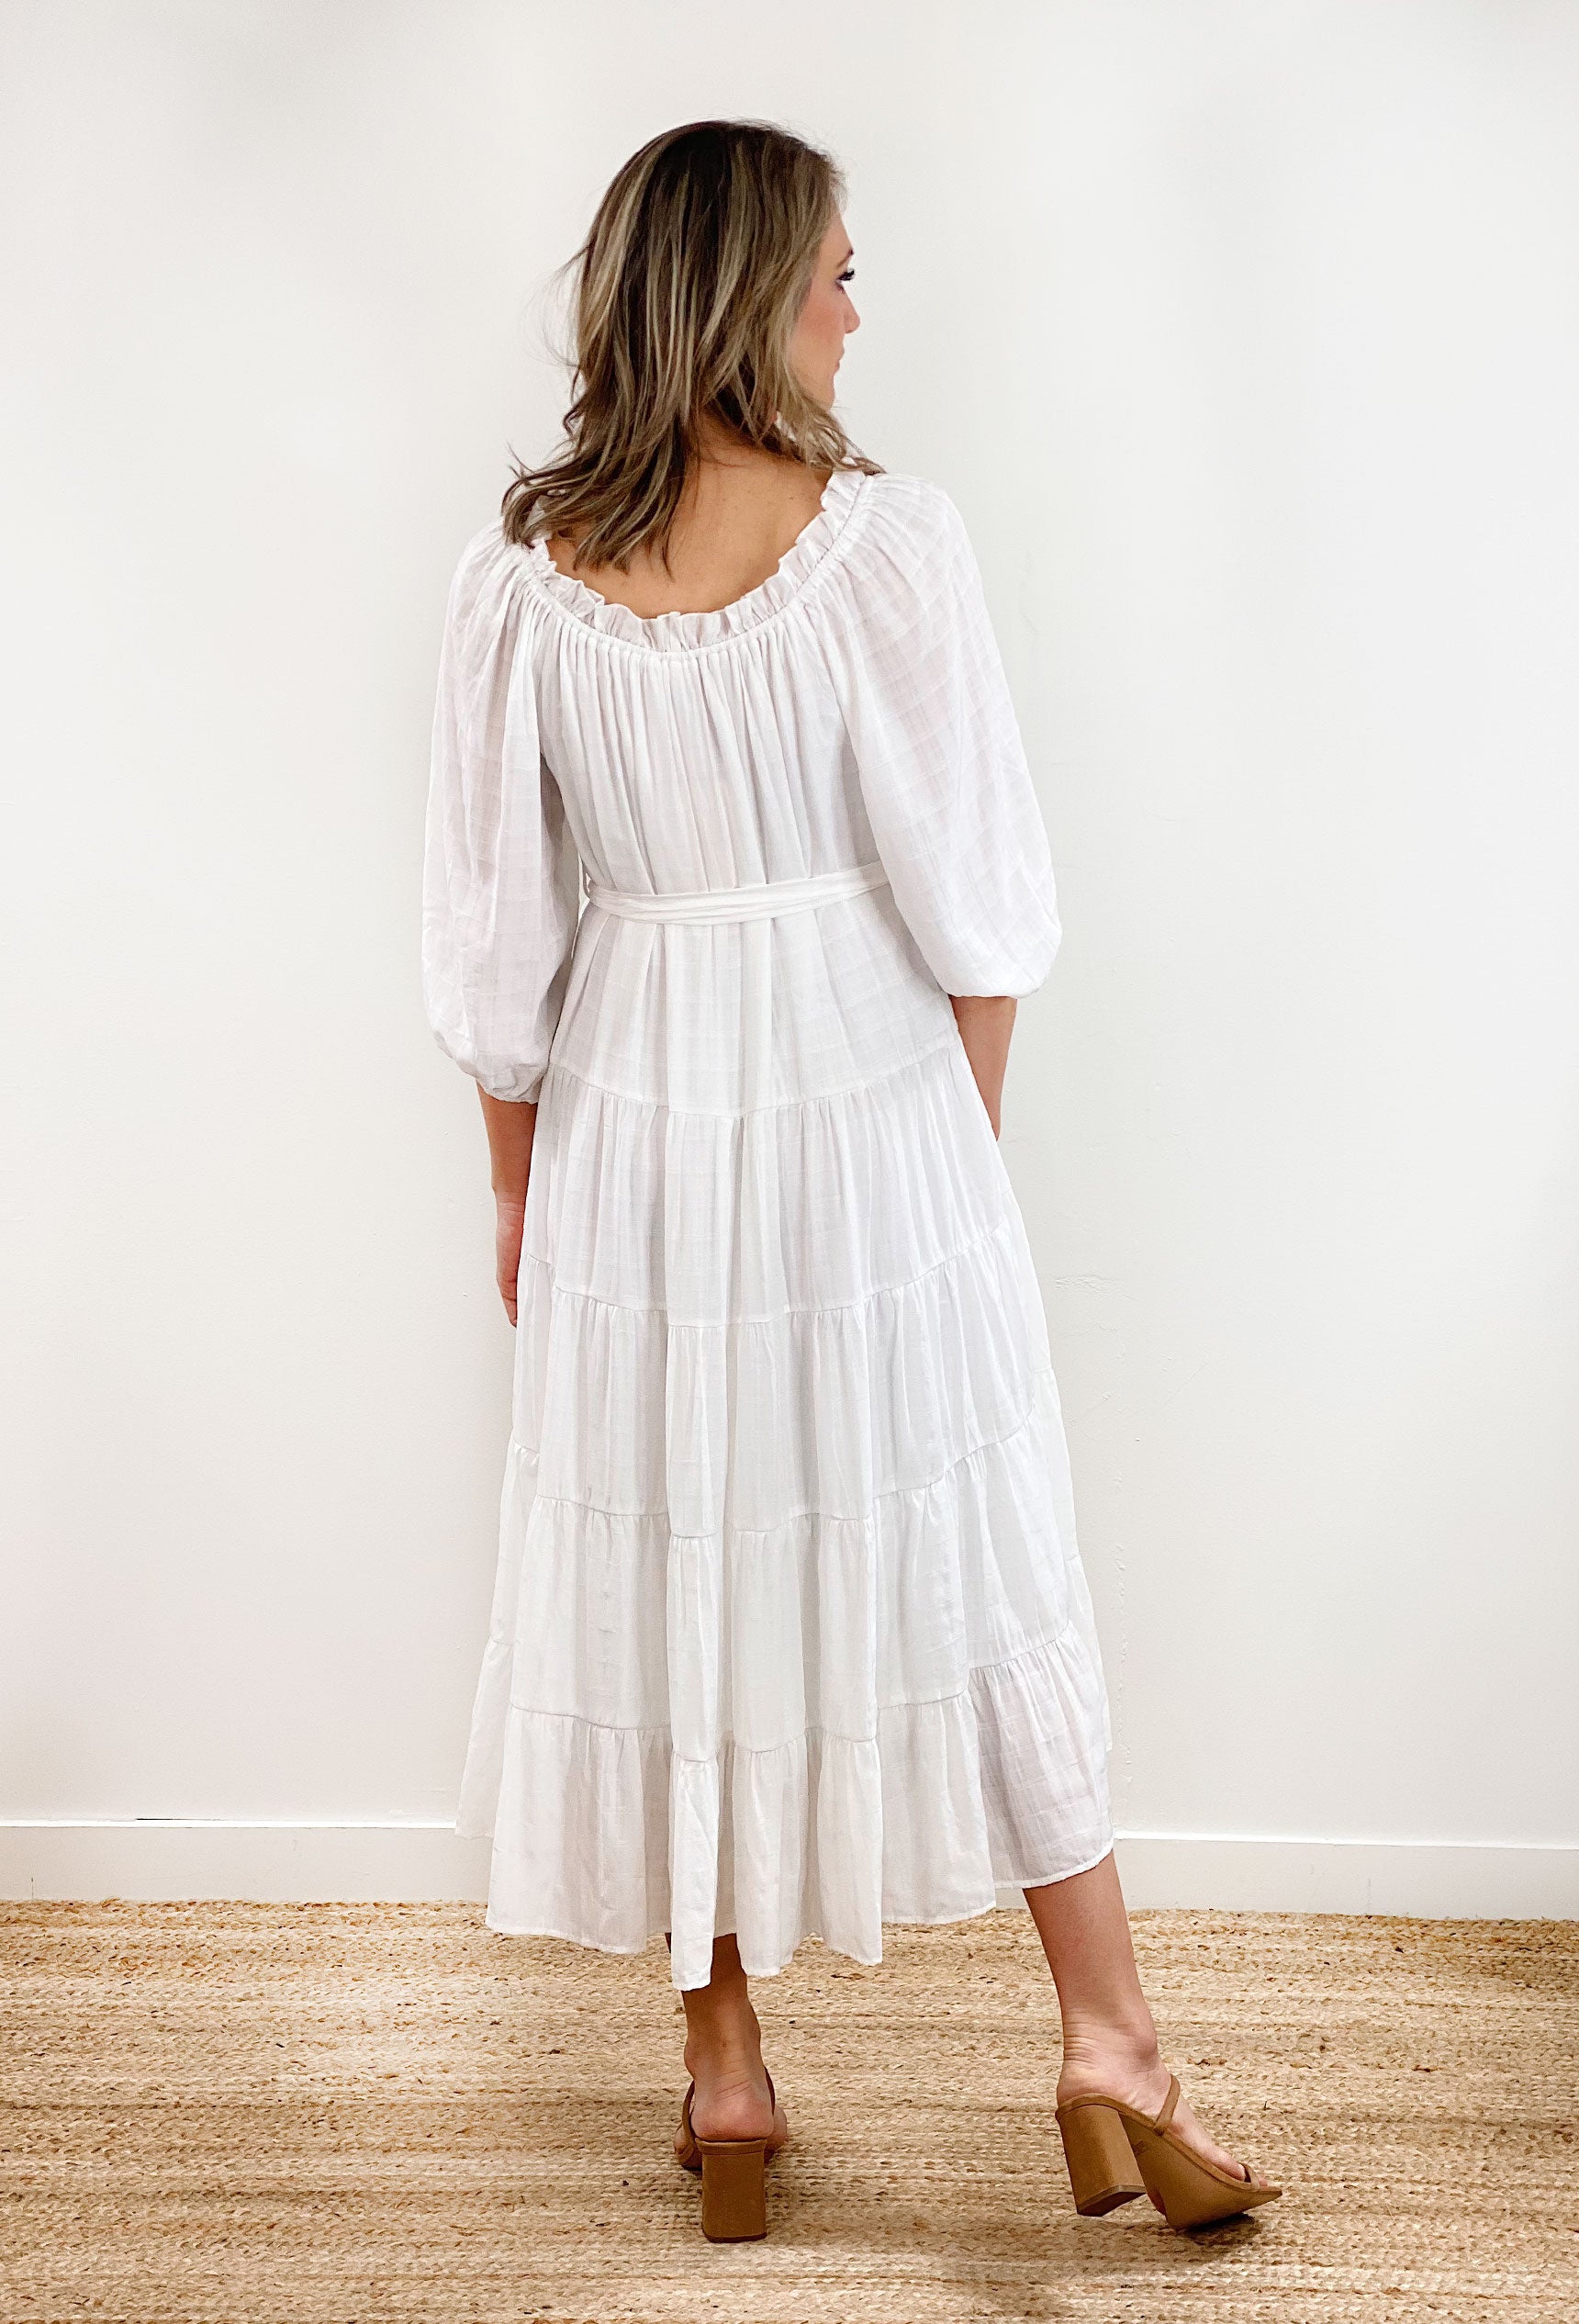 Make A Toast Midi Dress, white tiered dress with tie around the waist, ruffle along neckline and drawstring detailing 